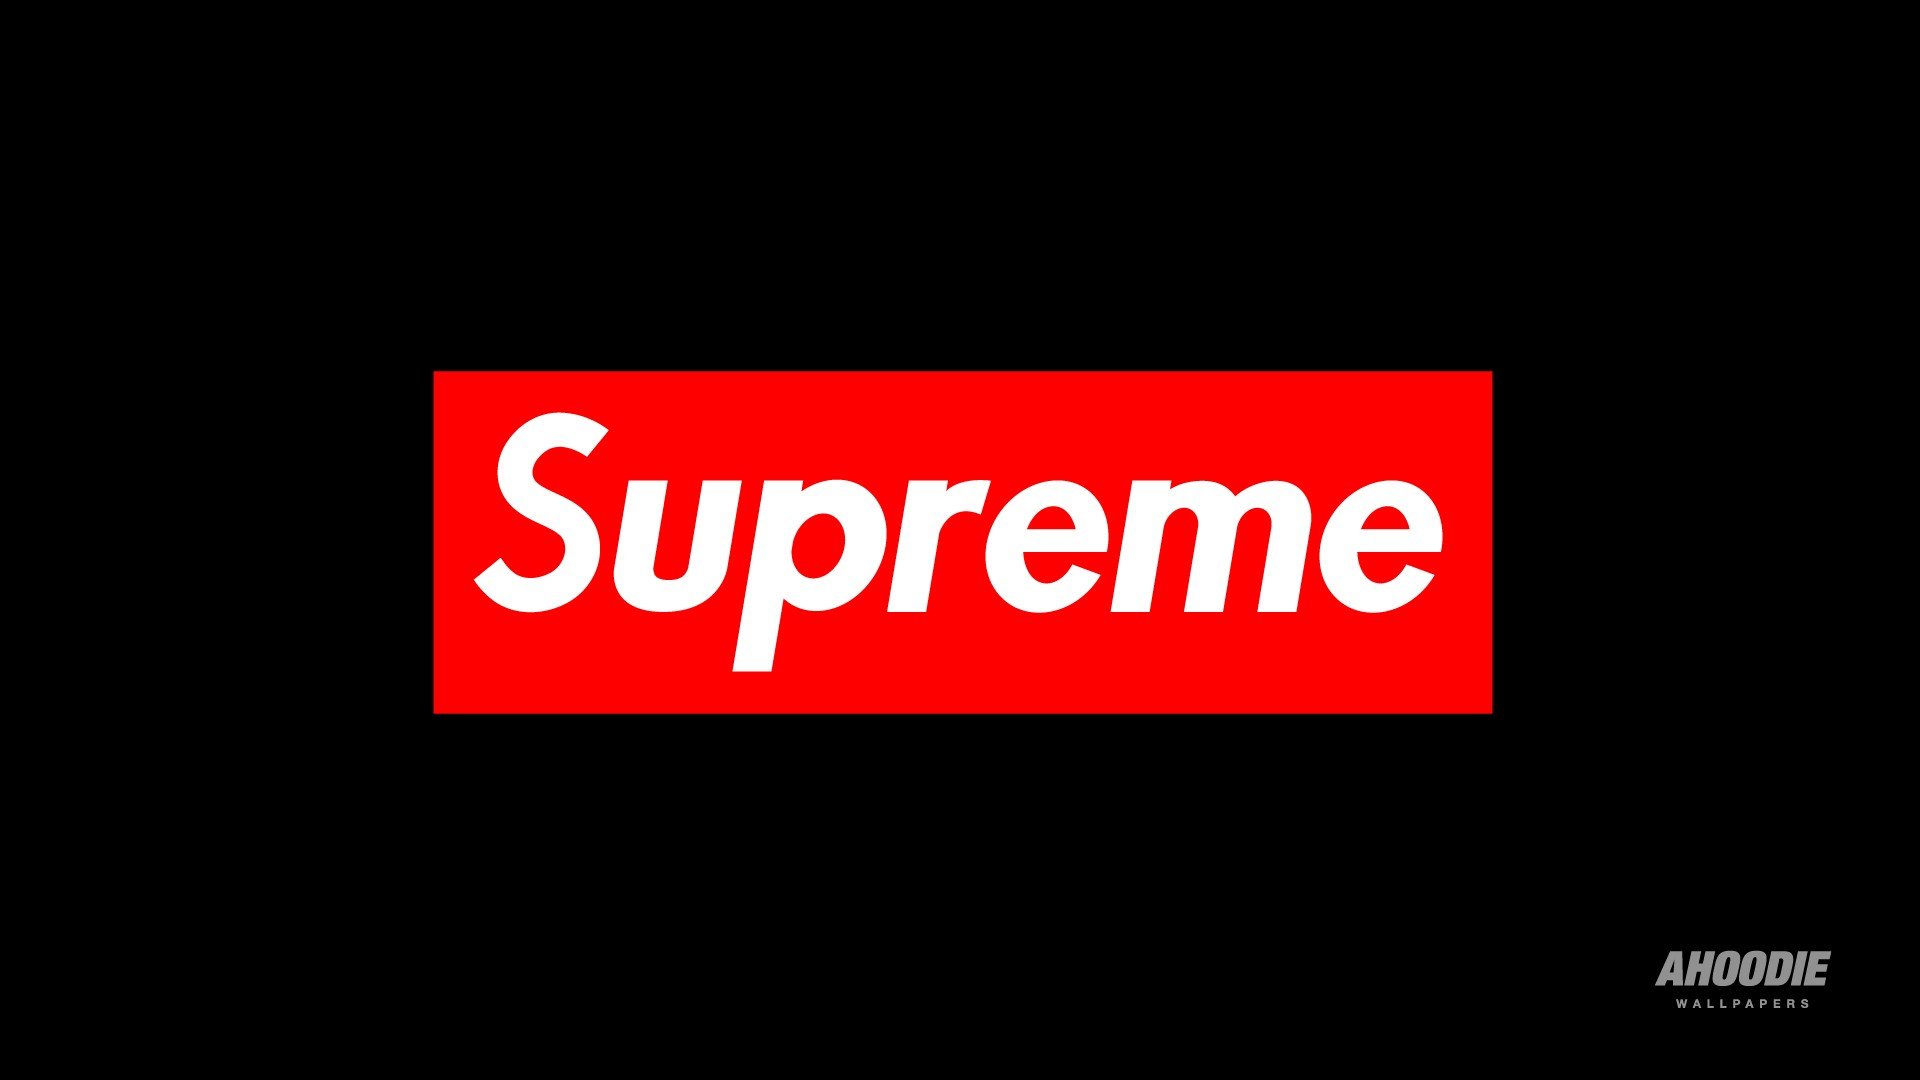 Supreme Brand Wallpapers - Top Free Supreme Brand Backgrounds ...